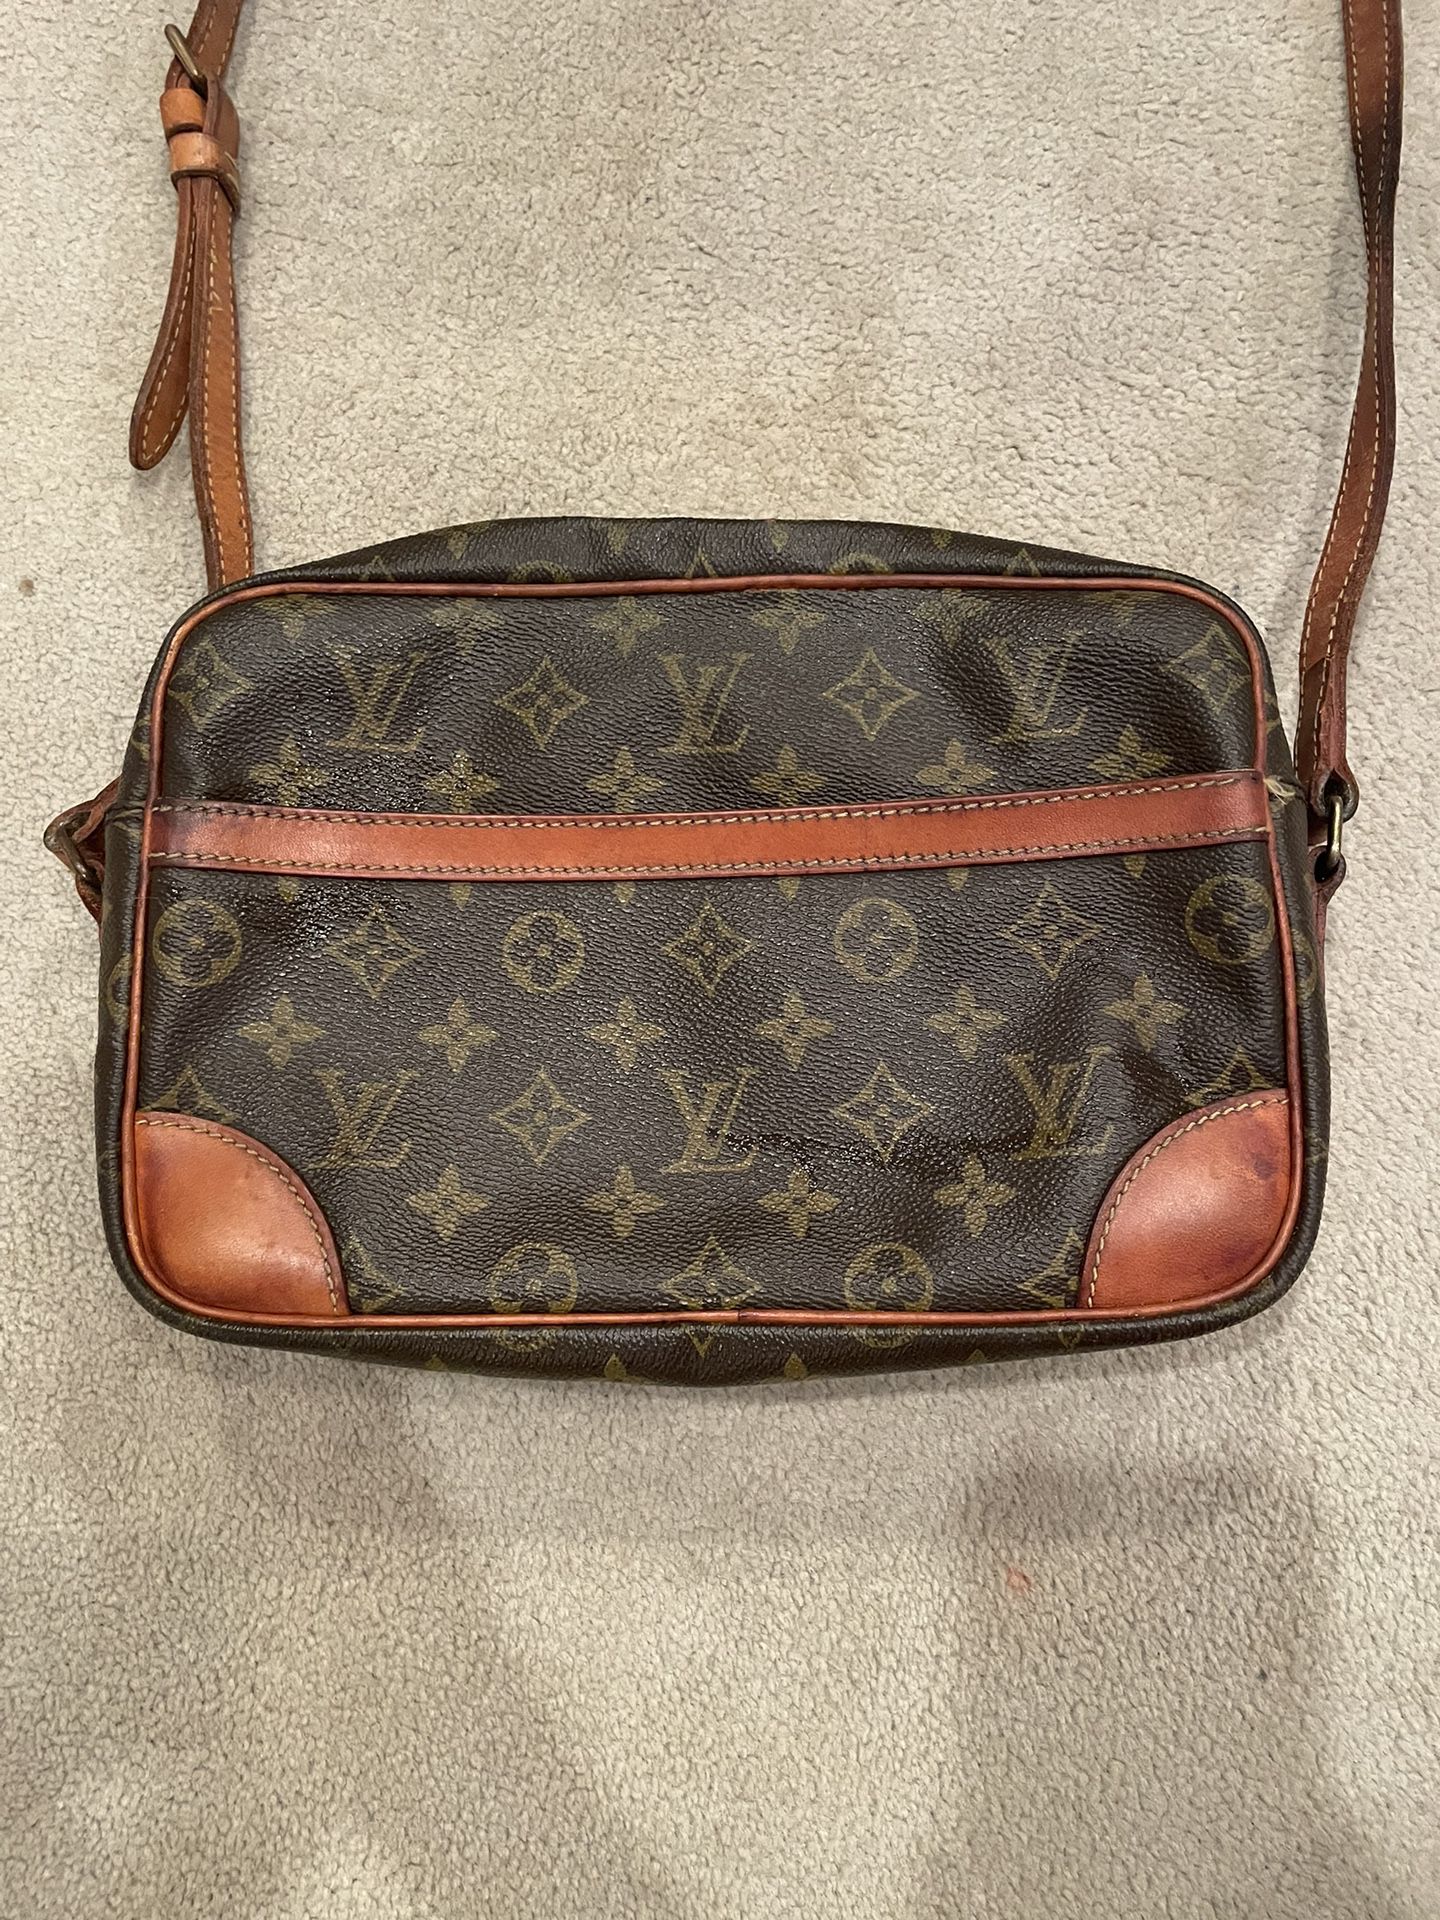 Authentic Louis Vuitton Belmont Bag for Sale in Lynbrook, NY - OfferUp